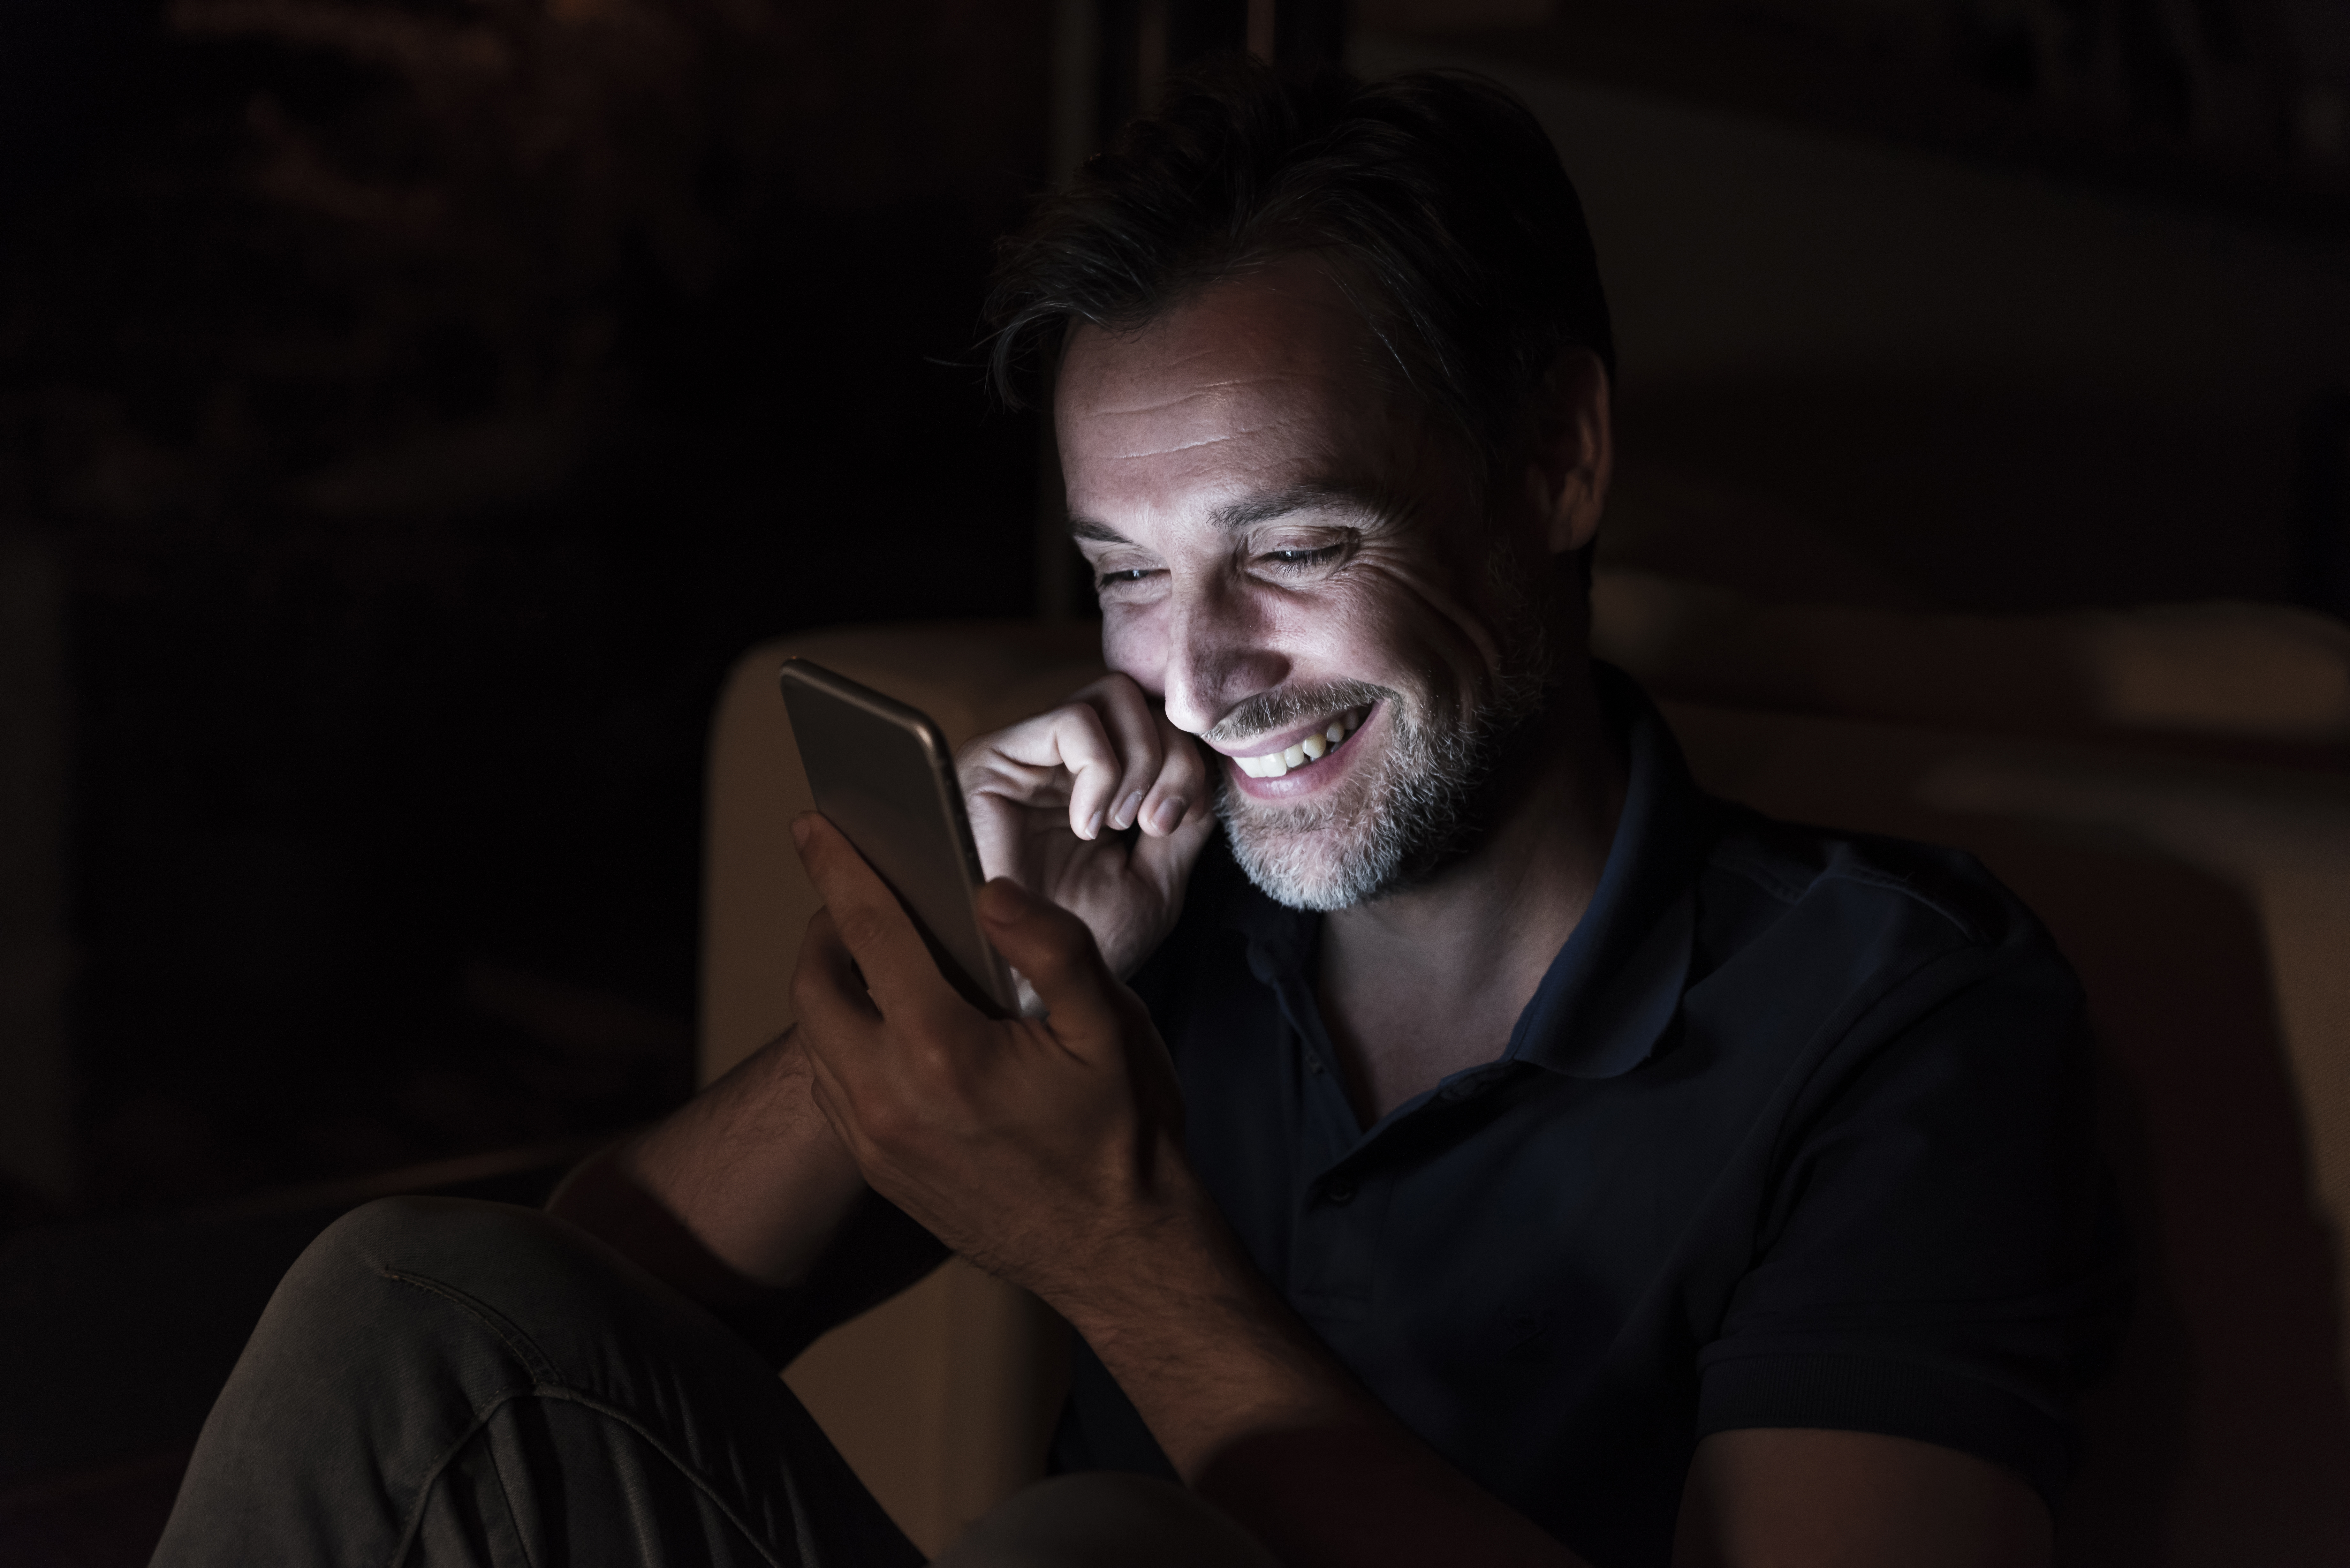 Man laughing while texting | Source: Getty Images